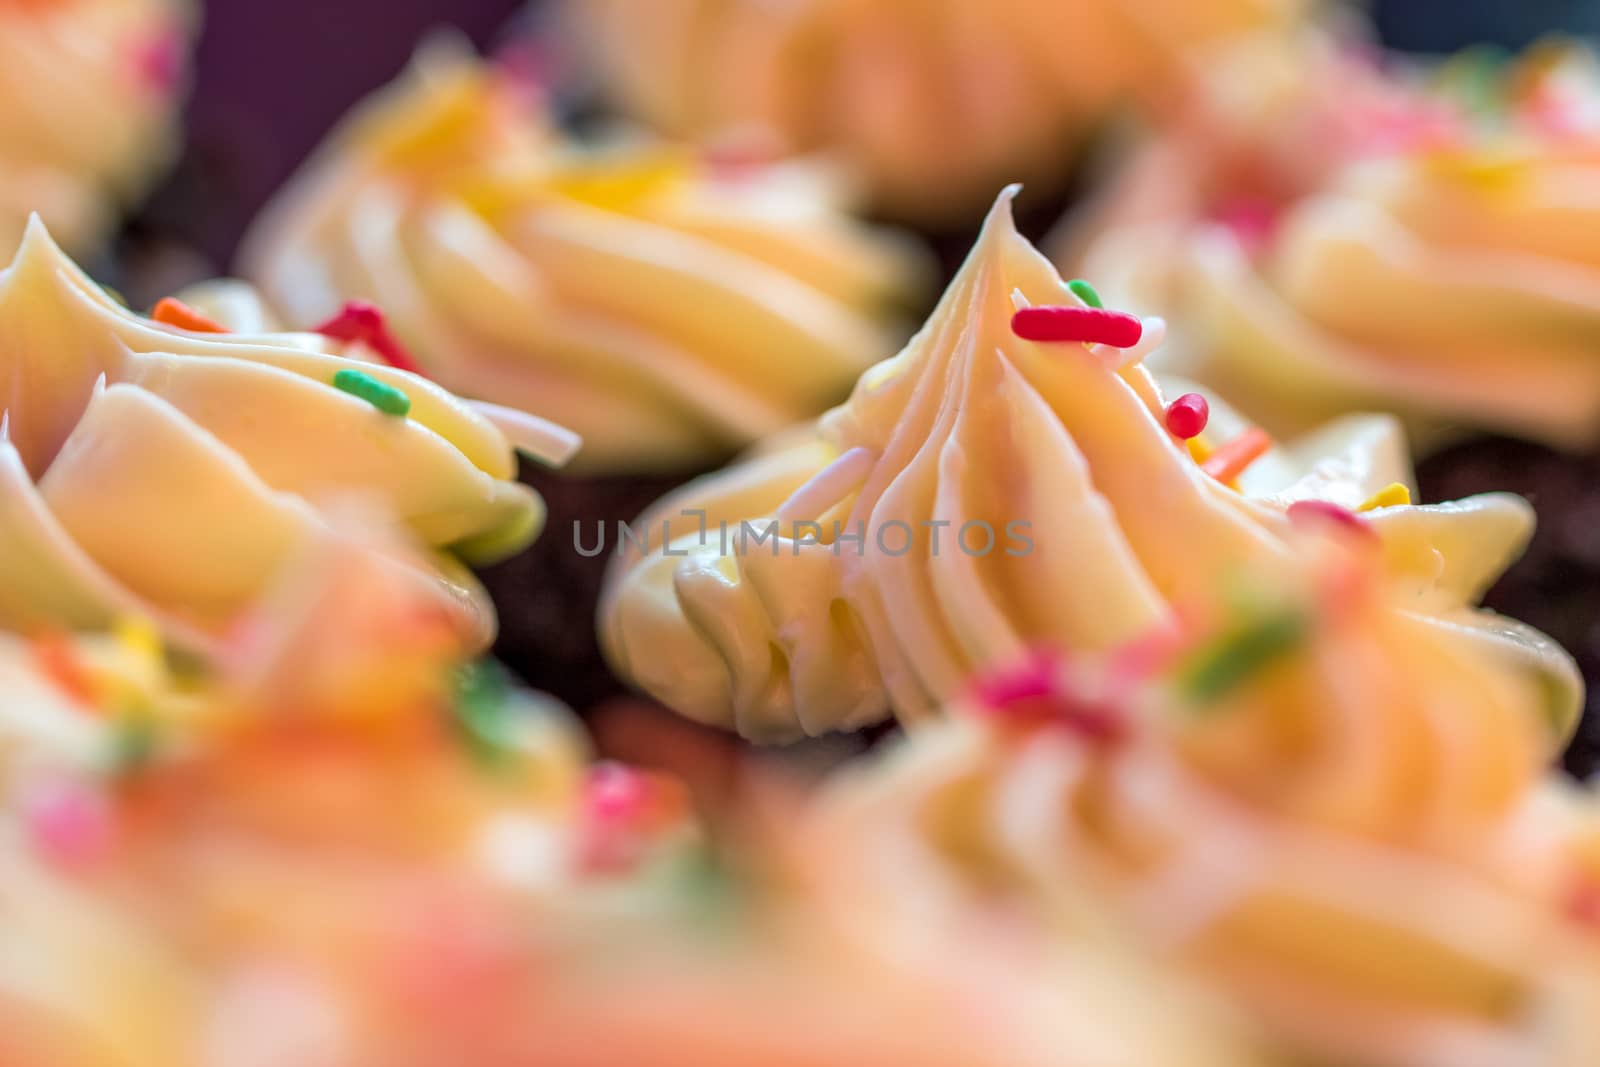 cupcakes topping close-up by azamshah72